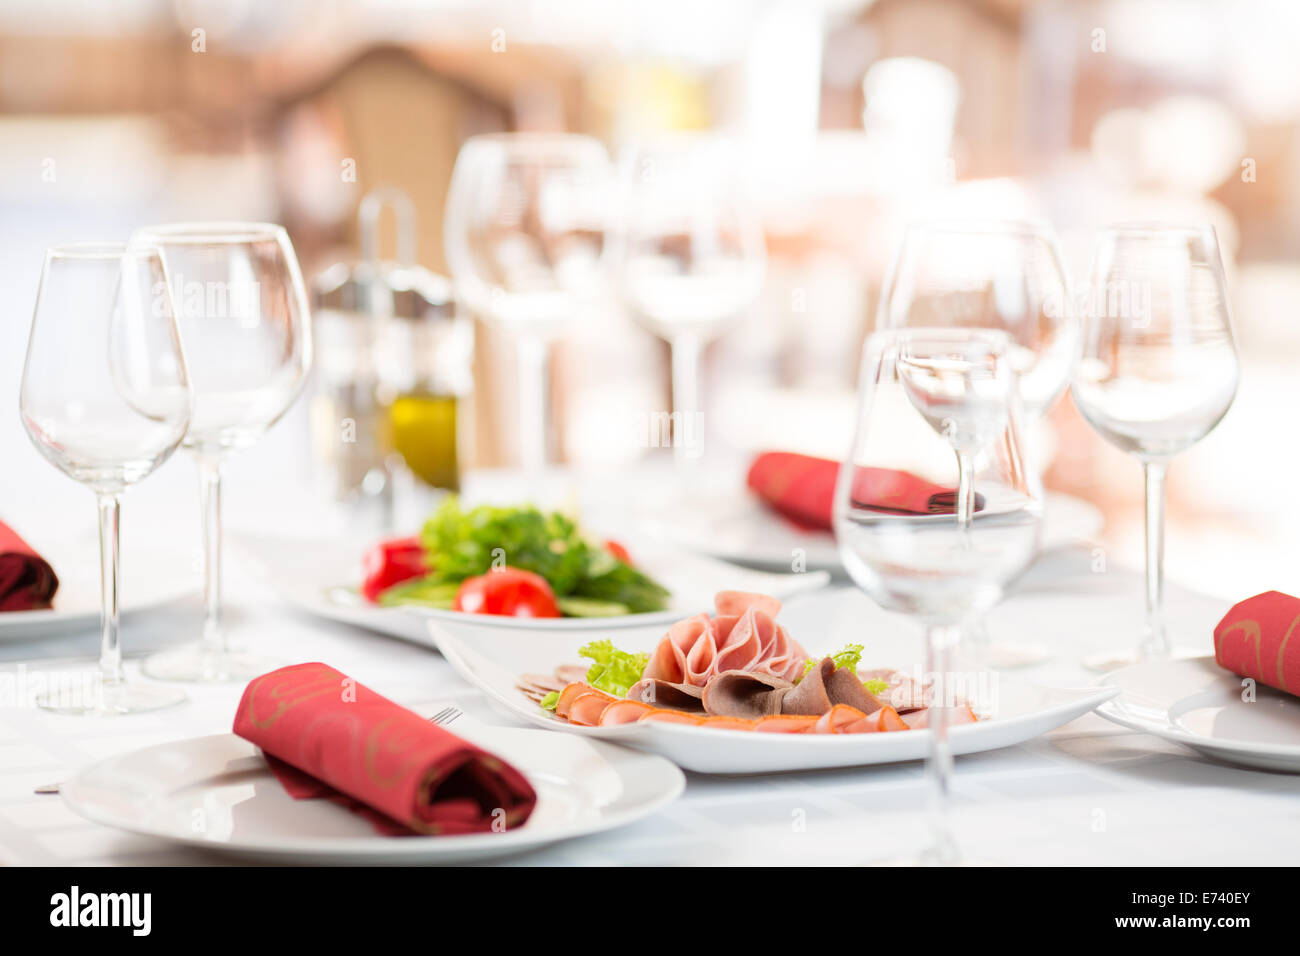 Banquet setting table in restaurant interior Stock Photo